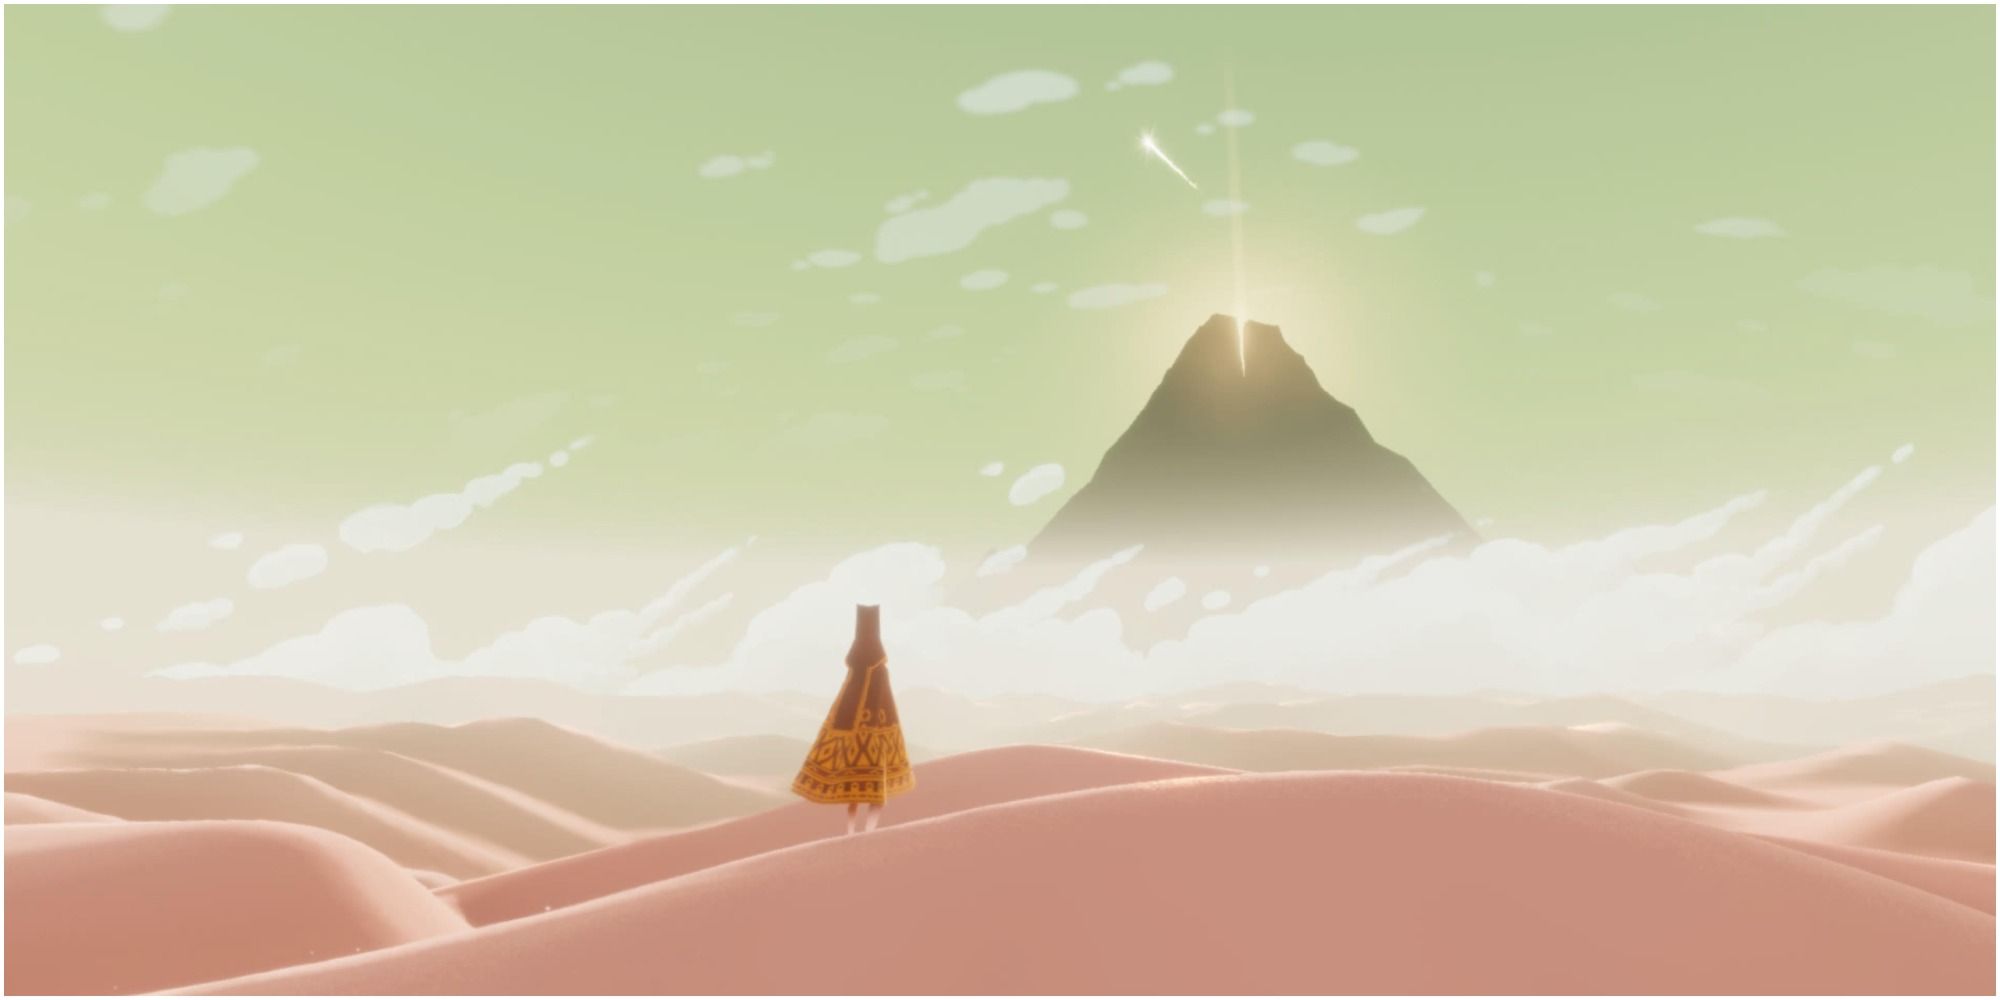 A still from Journey, a cloaked figure stands in the desert facing a glowing mountain